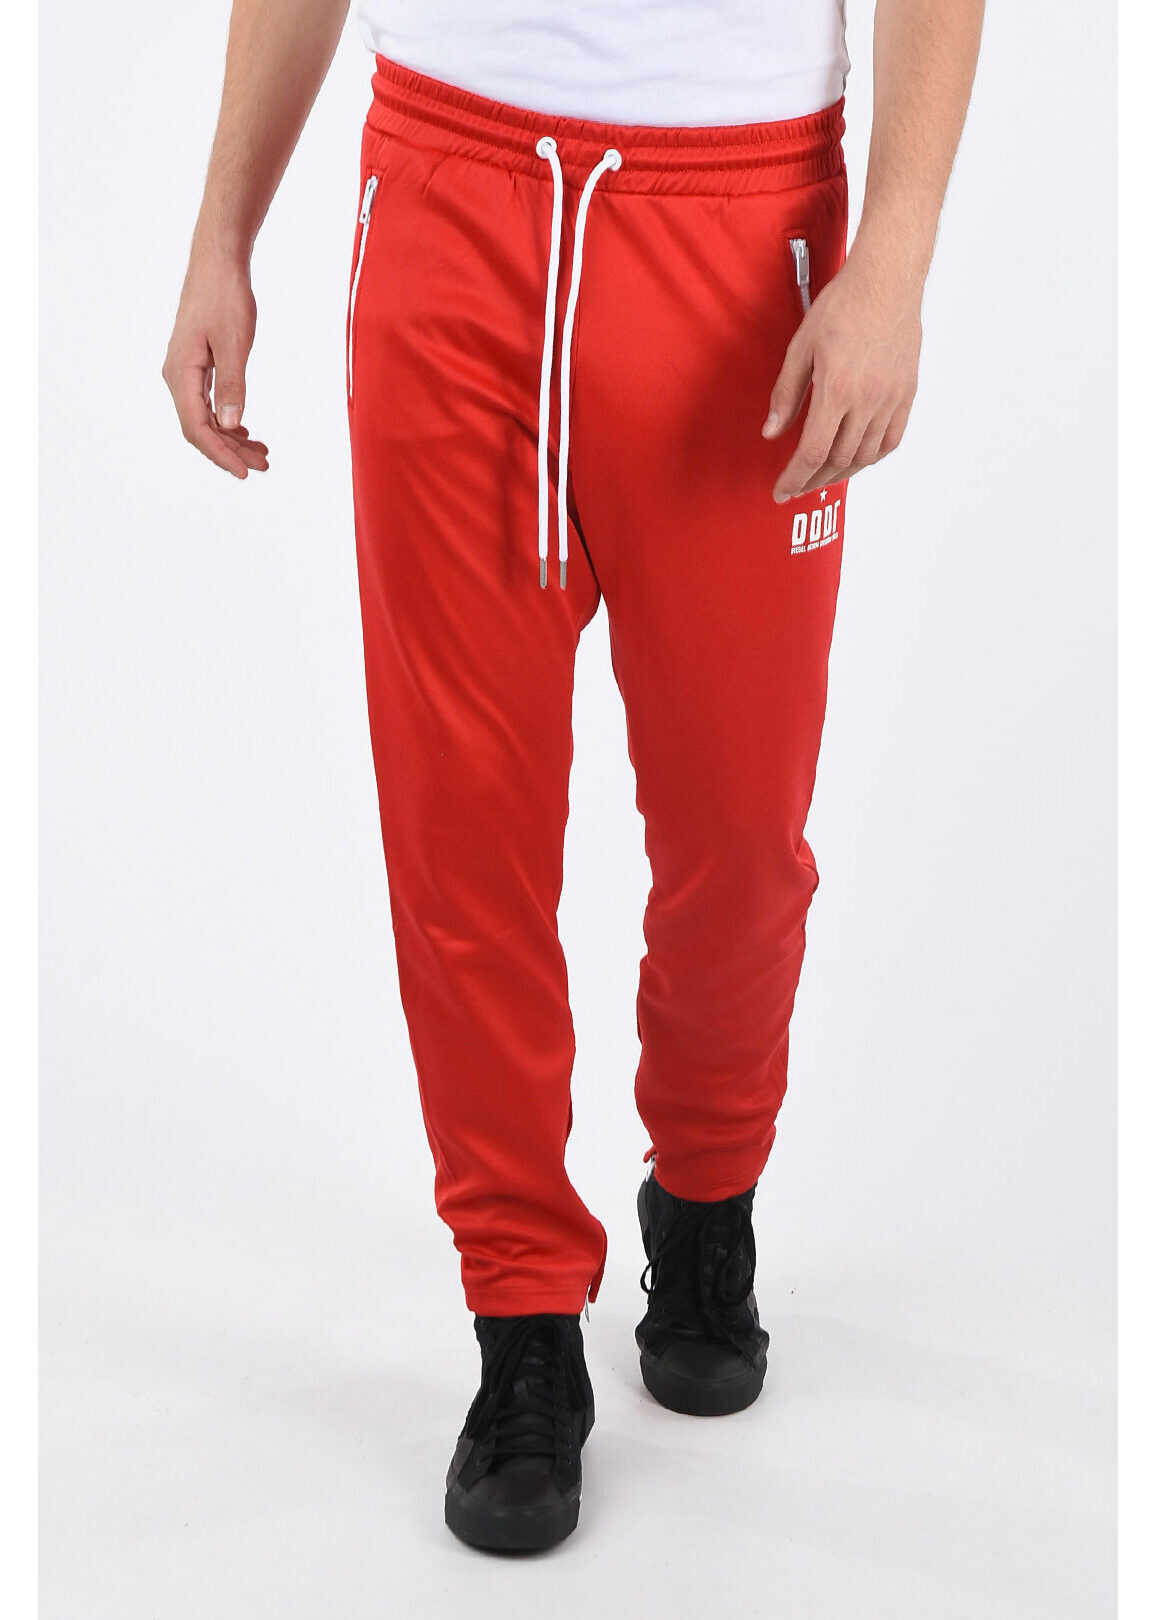 Diesel Ankle Zipped P-YEGOR-K Jogger RED